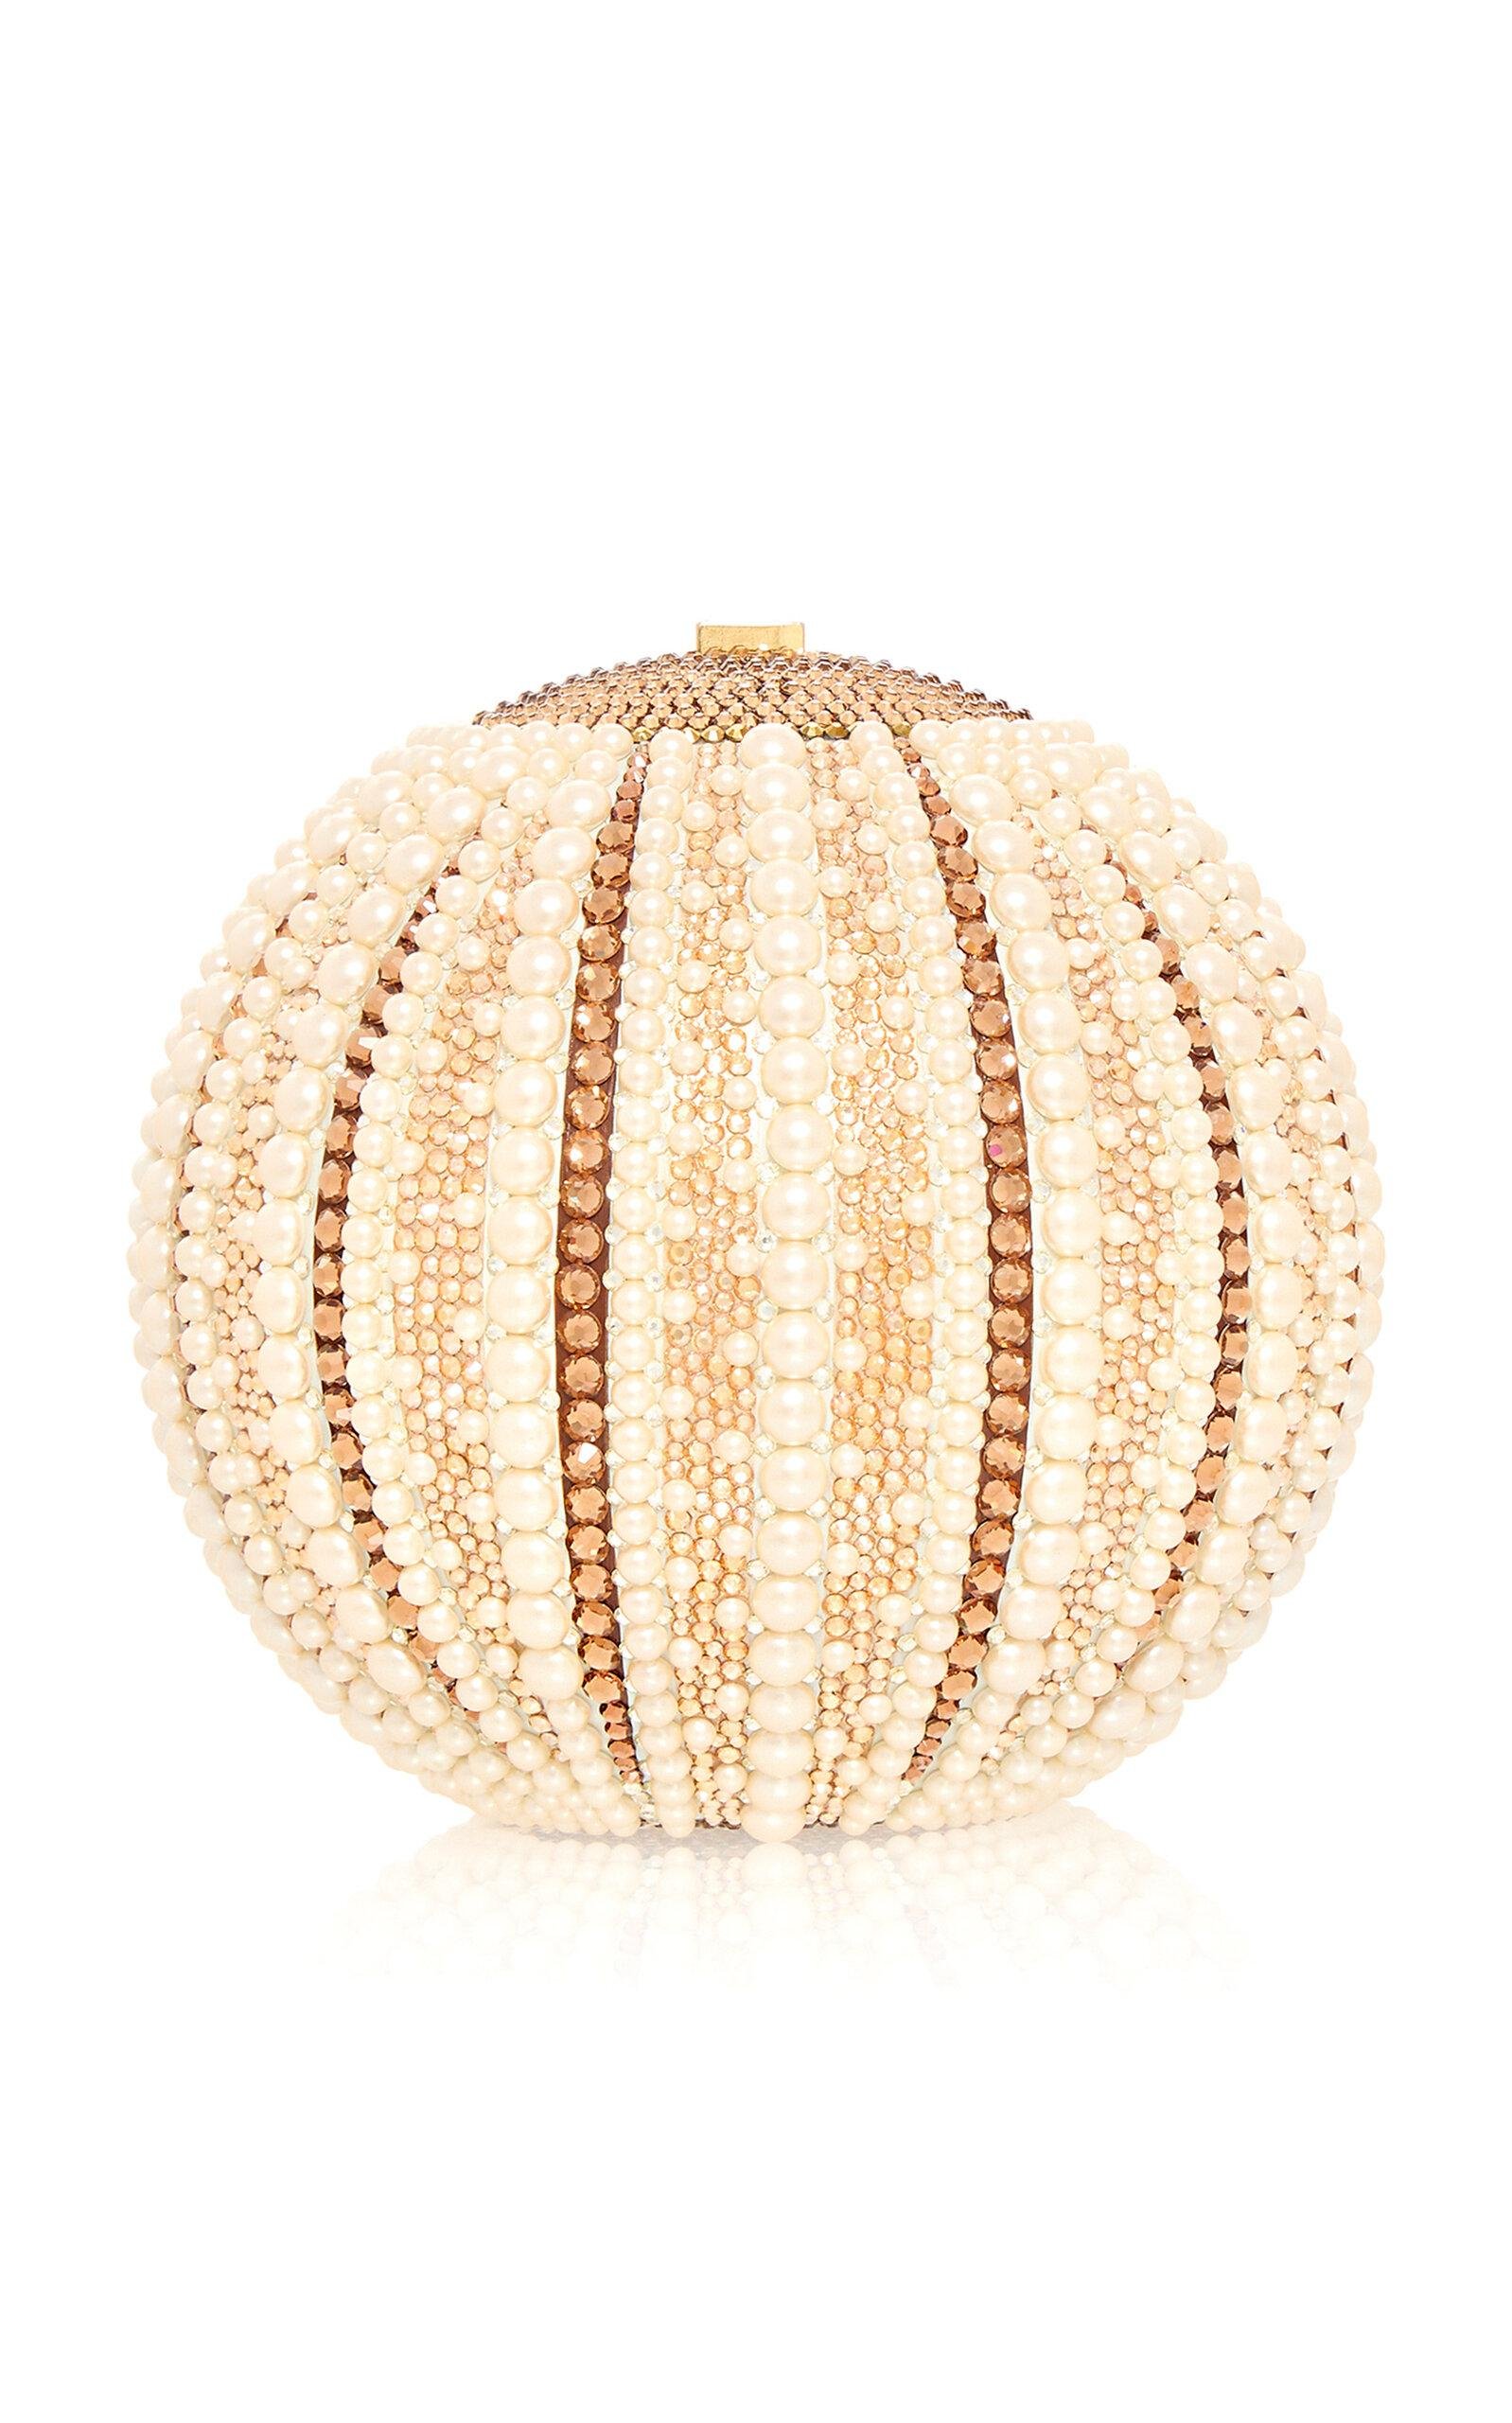 Judith Leiber Couture - Sea Urchin Sphere Crystal Clutch - Gold - OS - Only At Moda Operandi by JUDITH LEIBER COUTURE